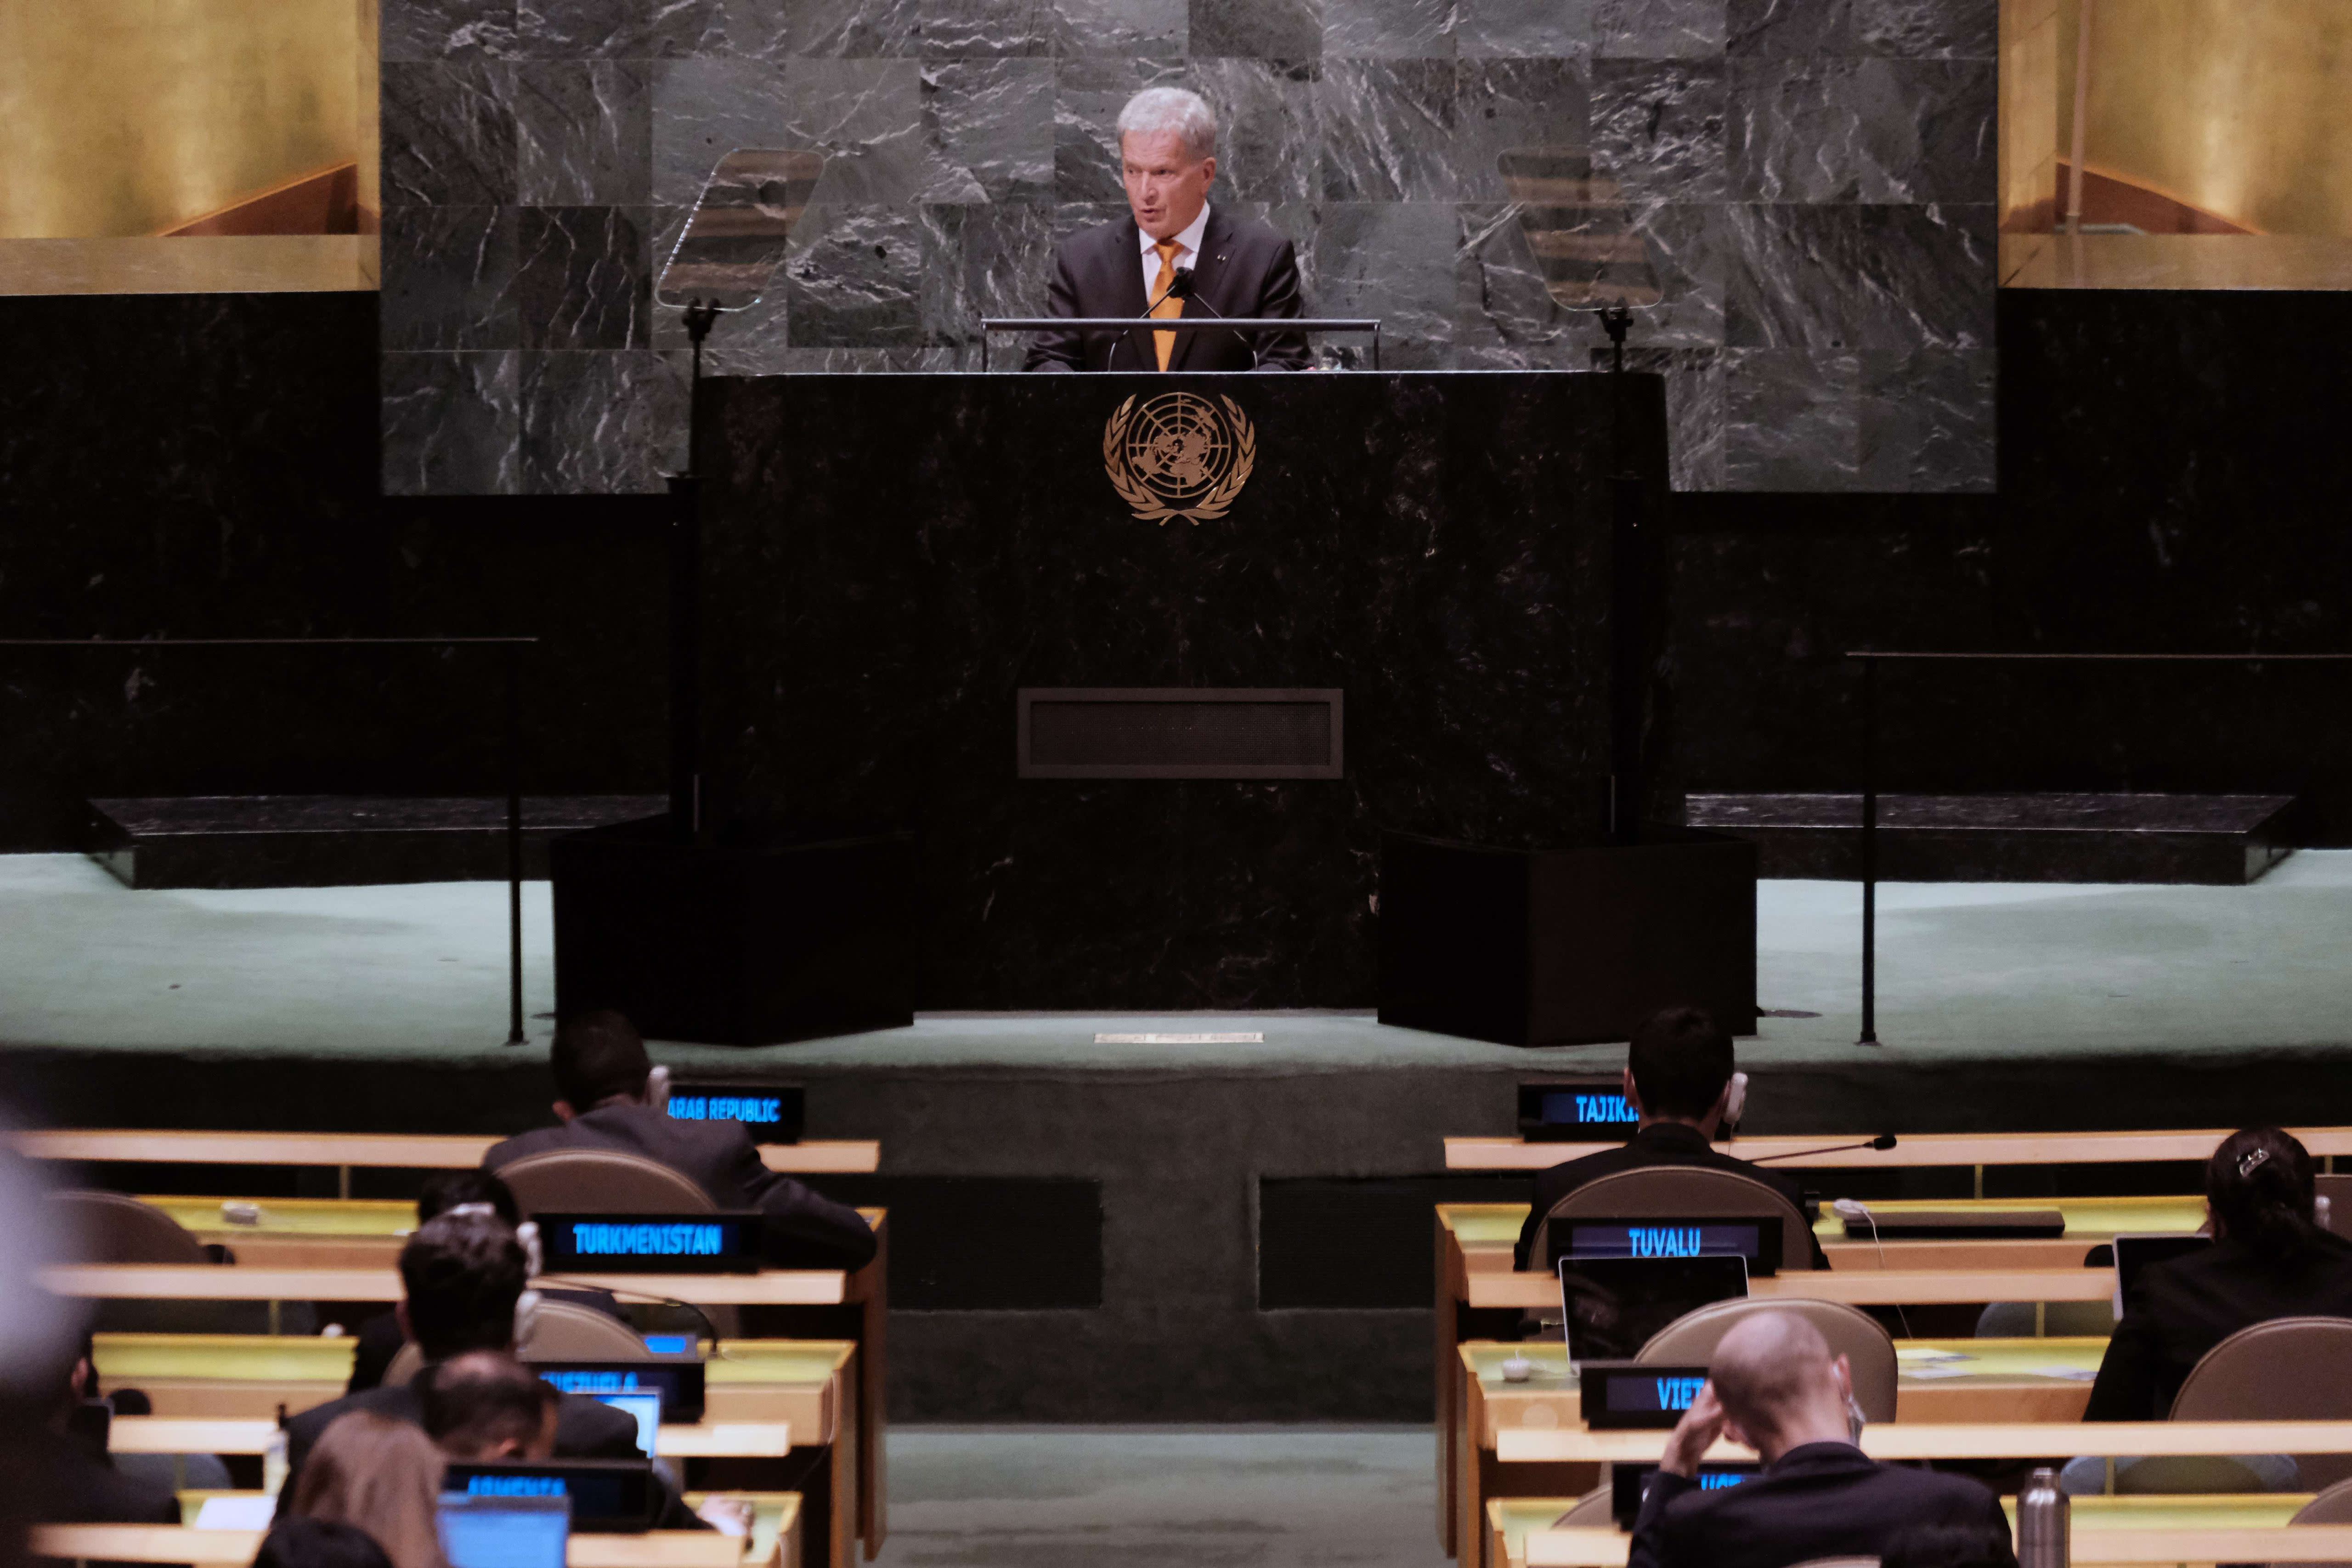 The President of Finland demands global responsibility in the UN General Assembly